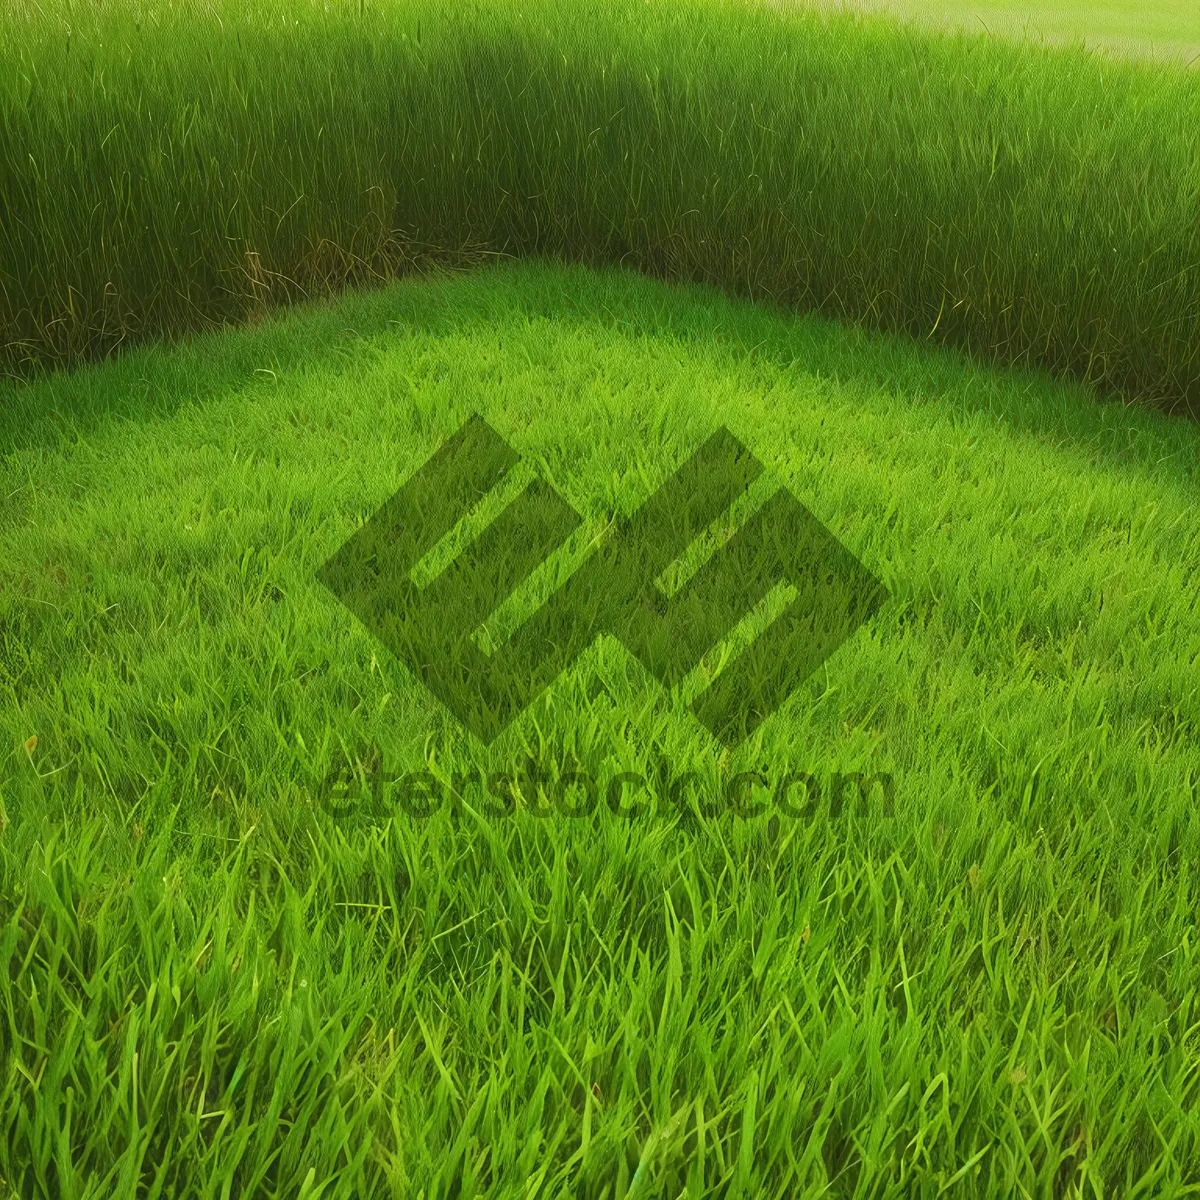 Picture of Vibrant Summer Greenery on Lush Grass Field